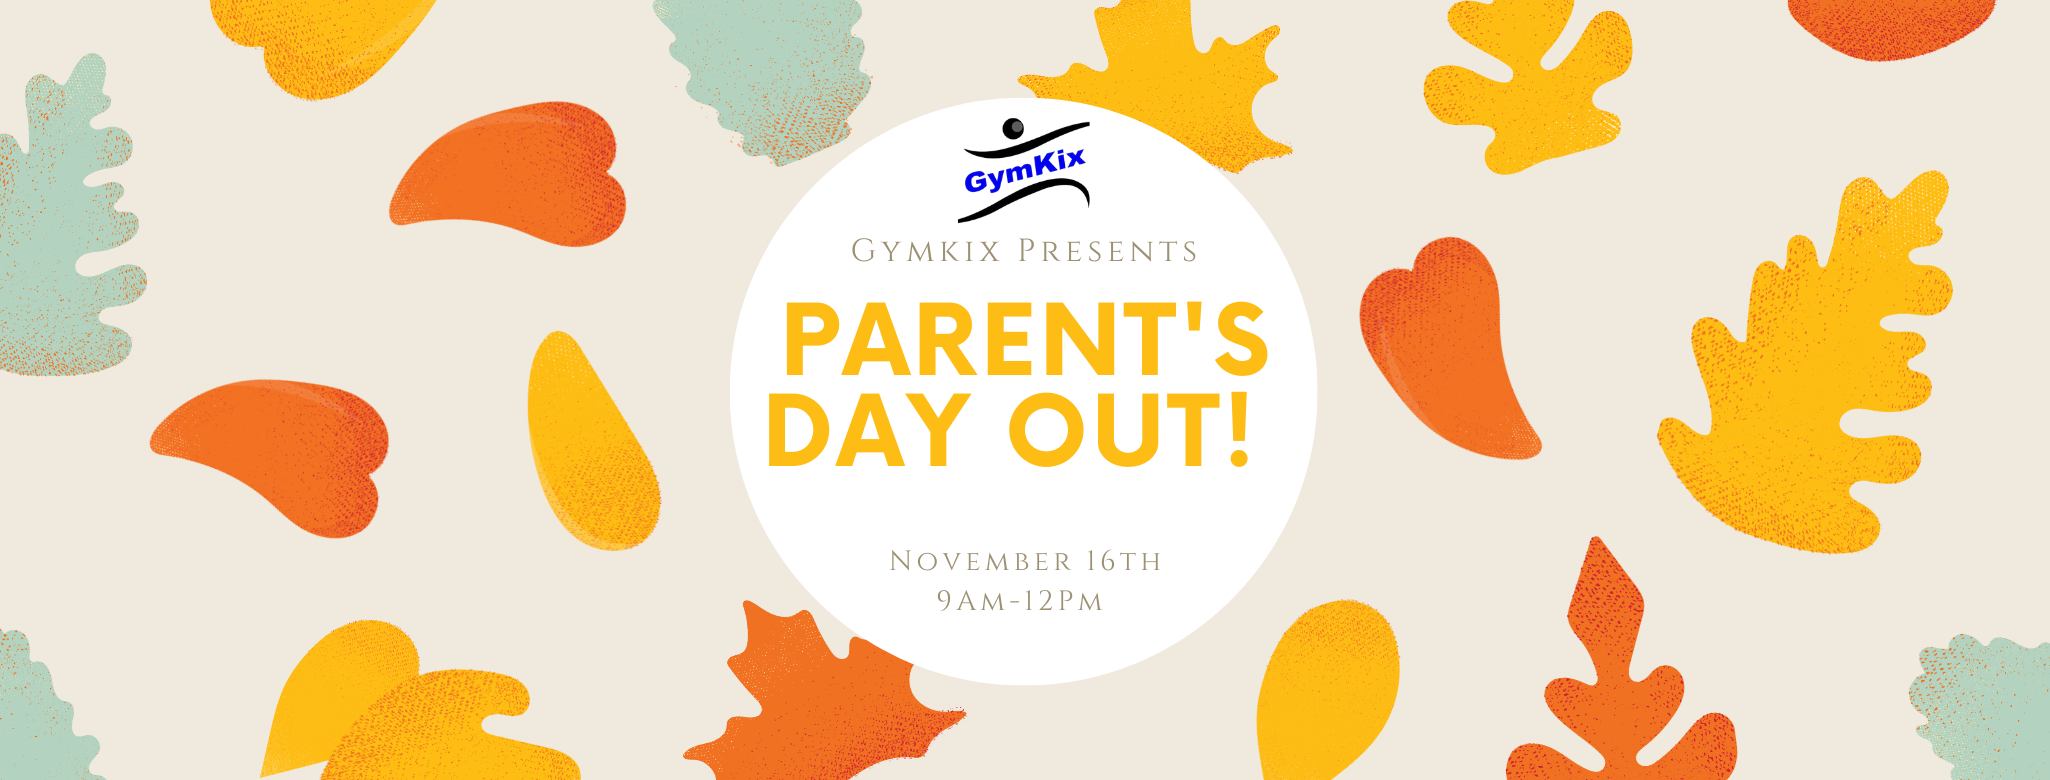 Parent's Day Out| Dec. 14th | Ages 3-5 Drop Off, Play Event 